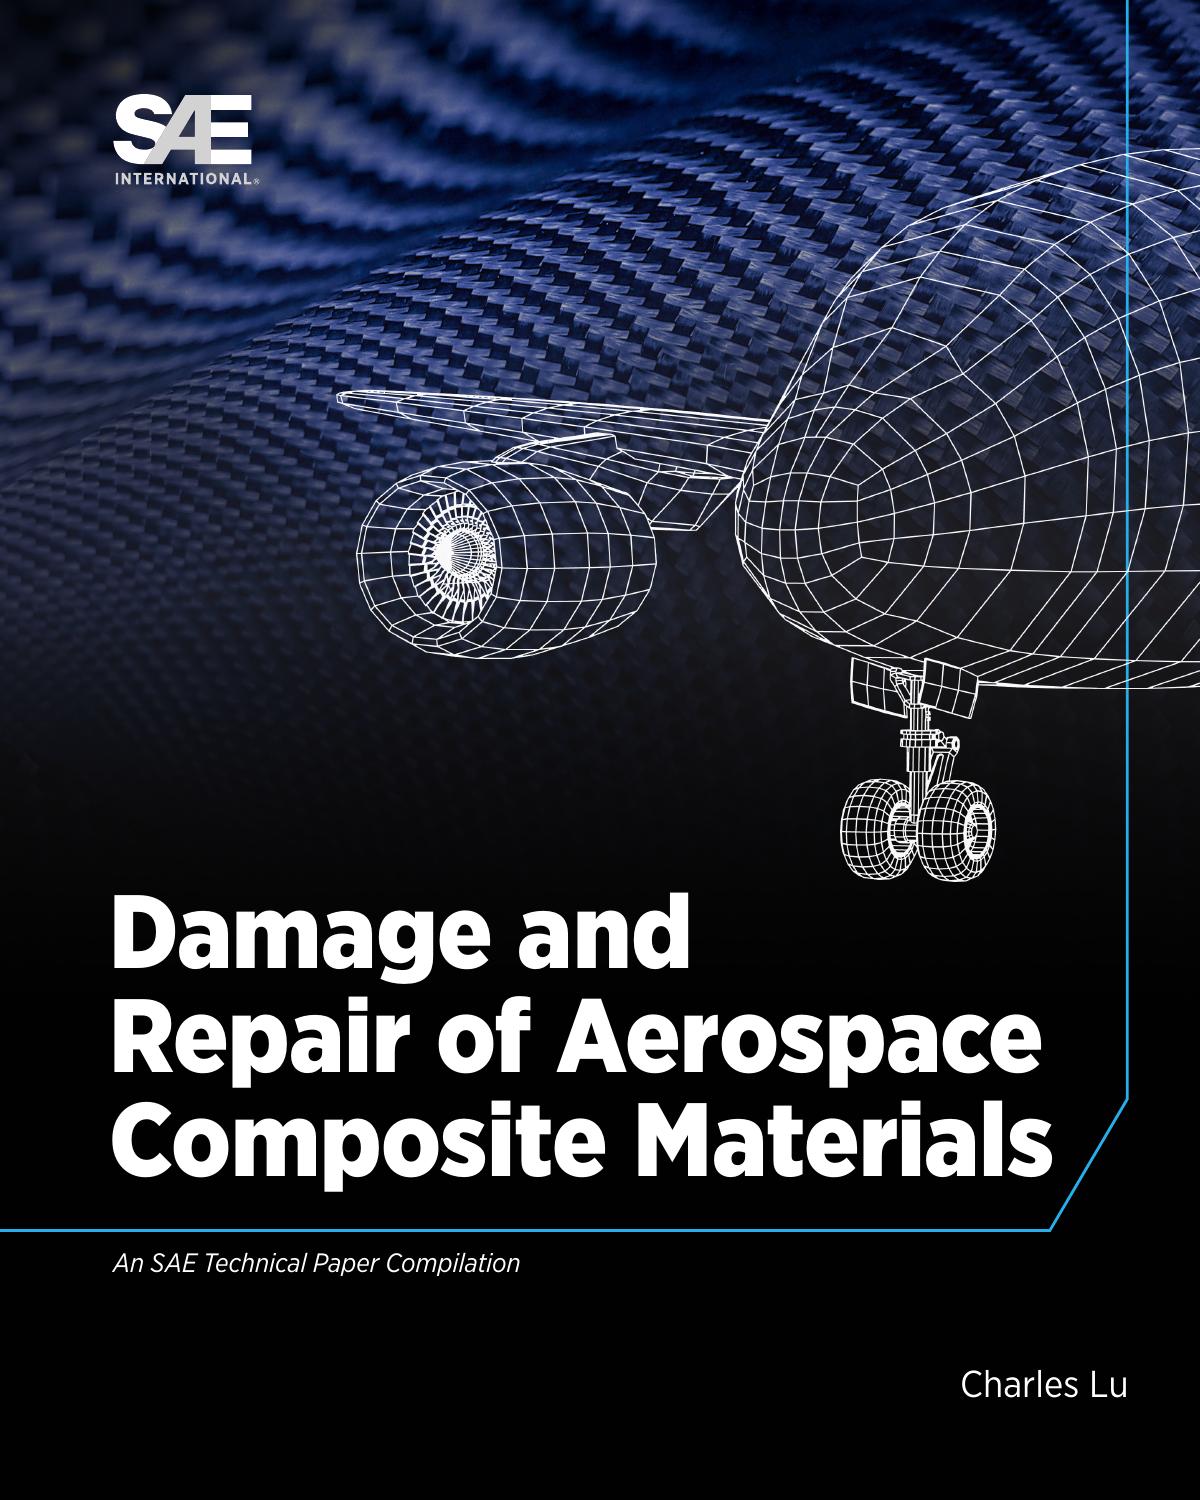 Damage and Repair of Aerospace Composite Materials by Charles Lu